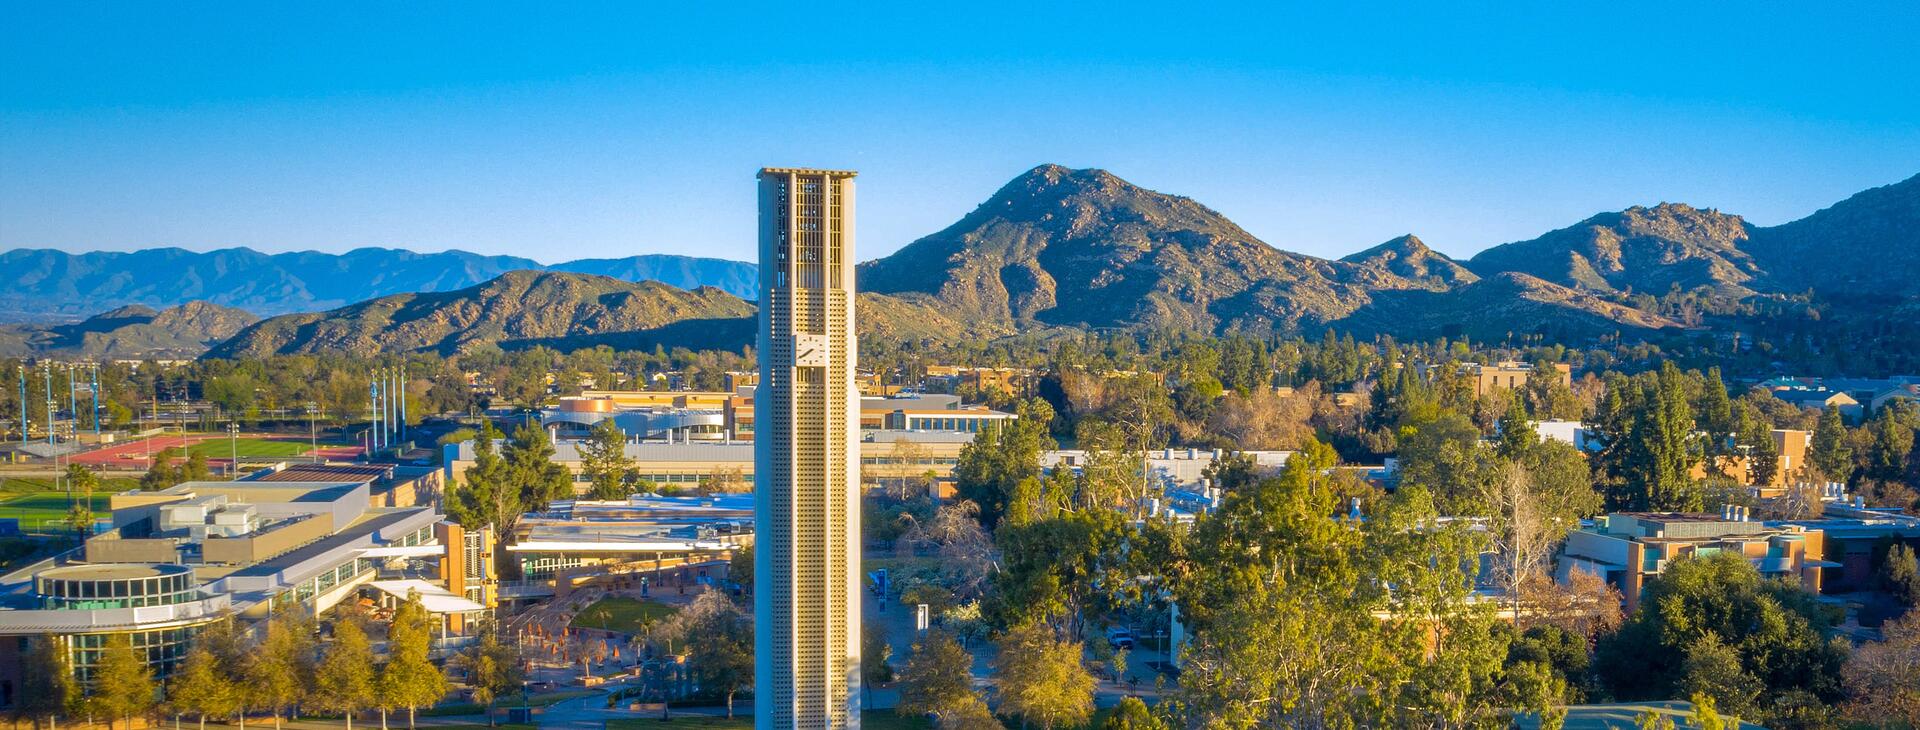 UC Riverside campus with bell tower in view